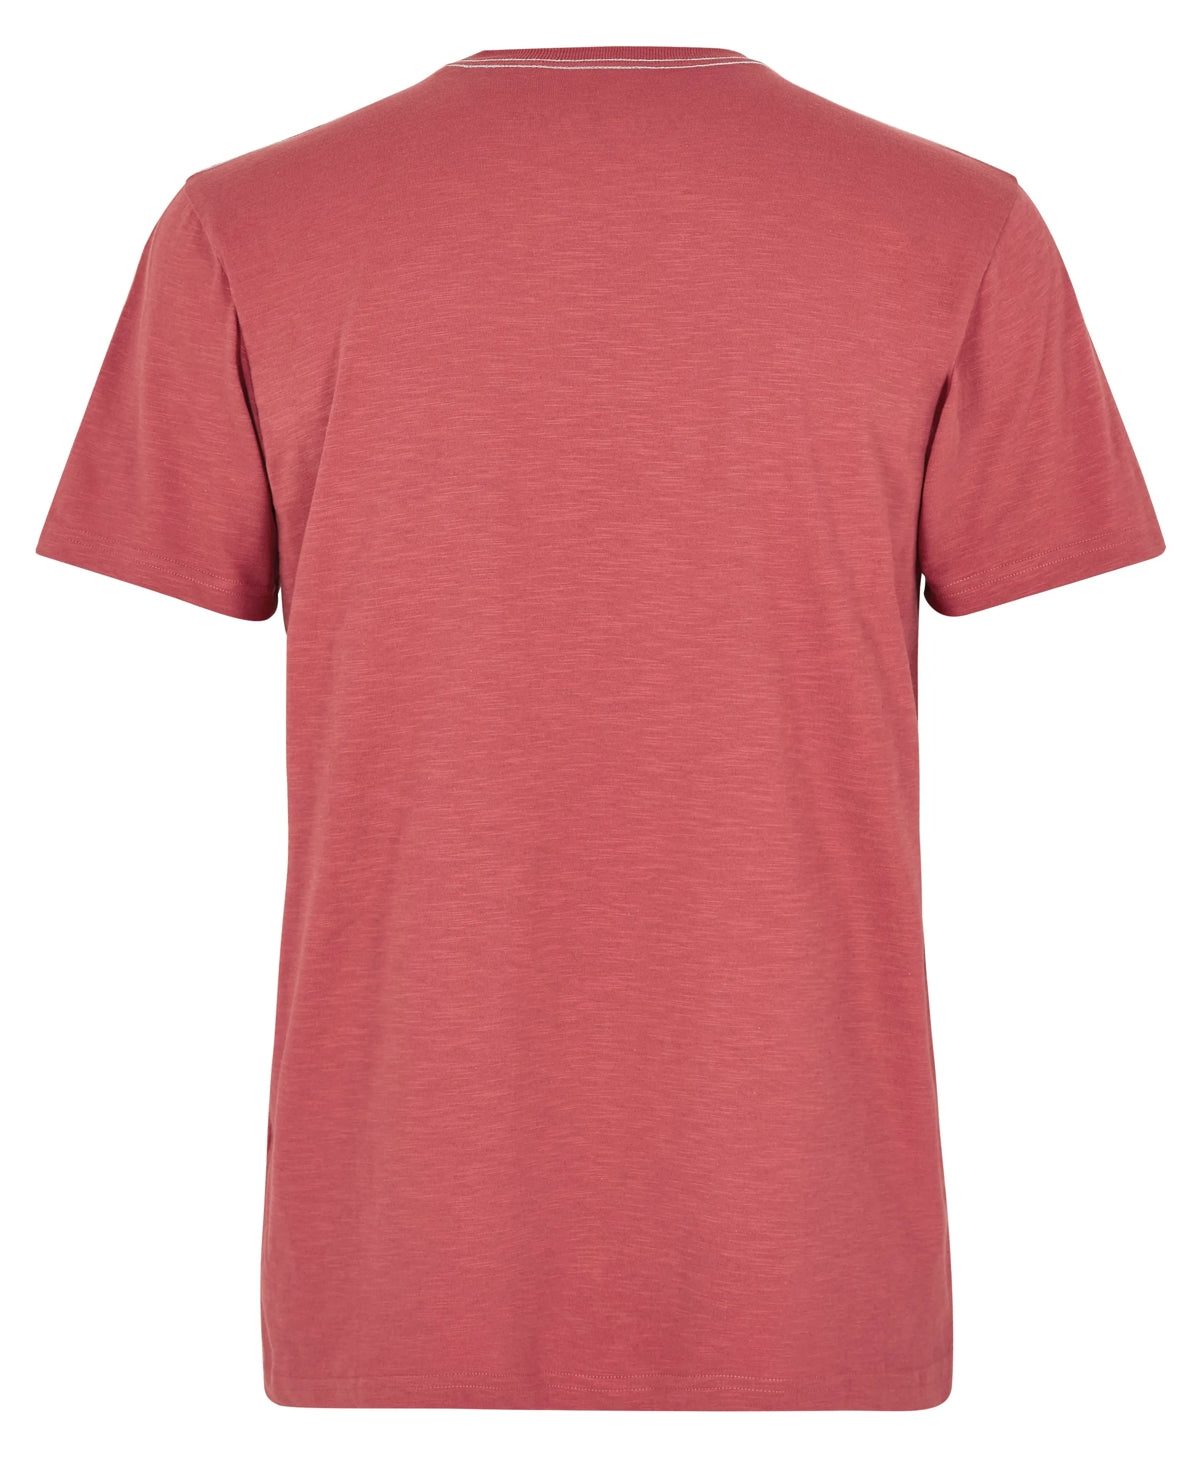 Men's short sleeve plain Fished tee from Weird Fish in Rosewood.